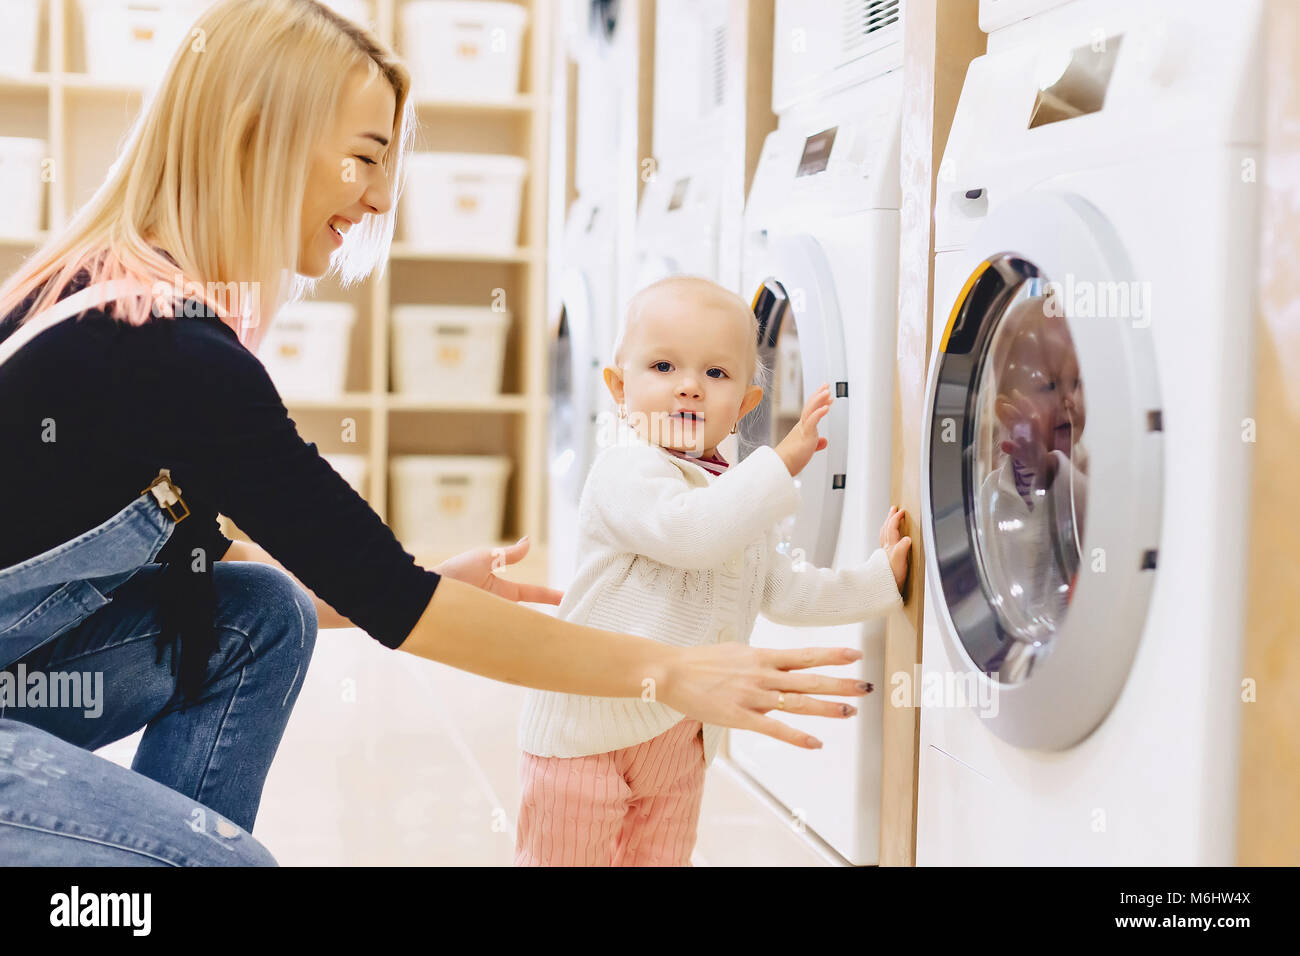 Funny Photos of a Mom Going Down a Laundry Shoot